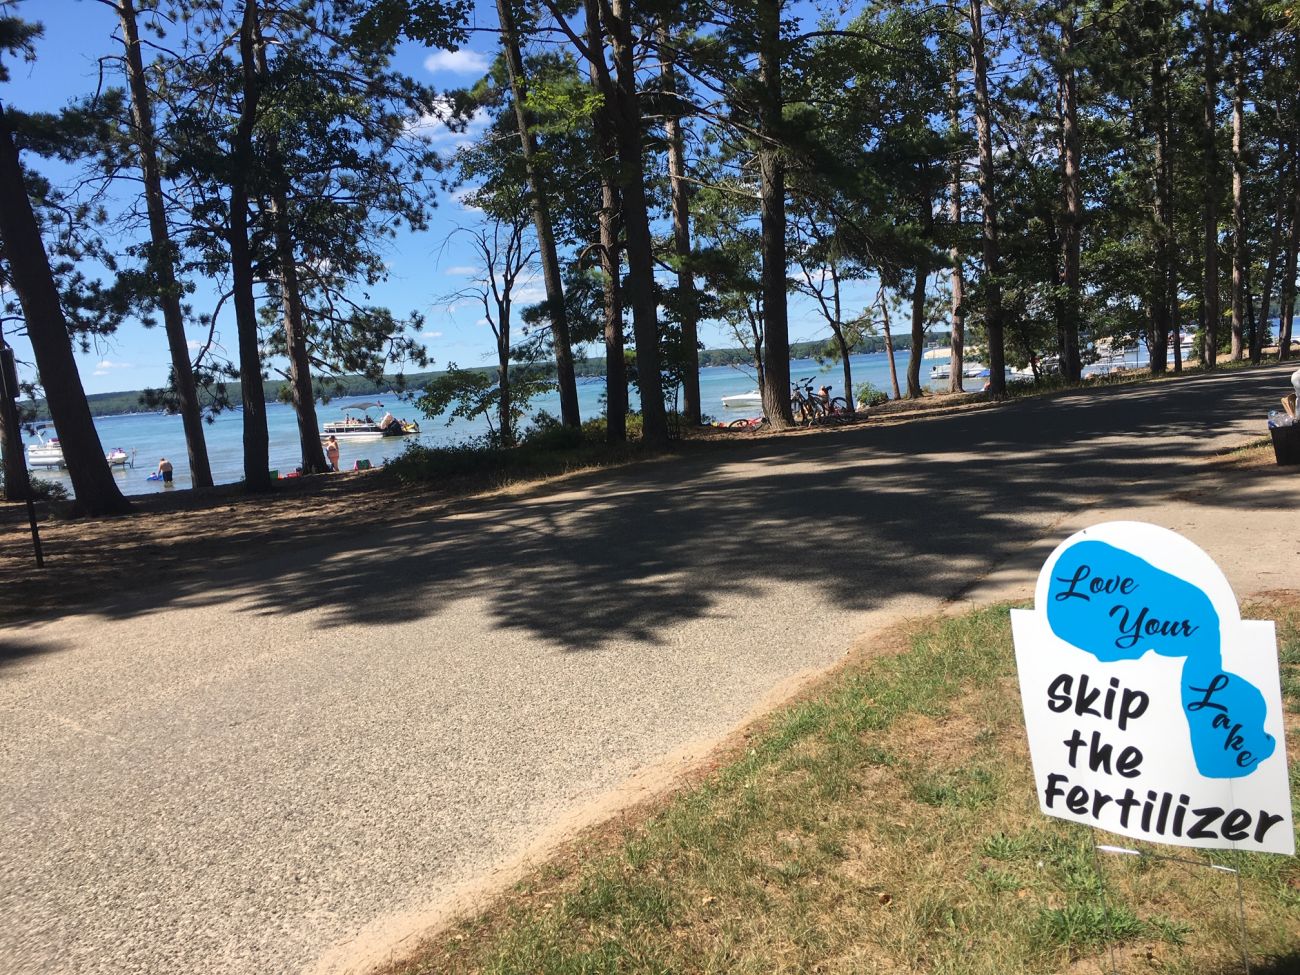 Higgins Lake’s crystal waters are under threat. Blame poop (and other